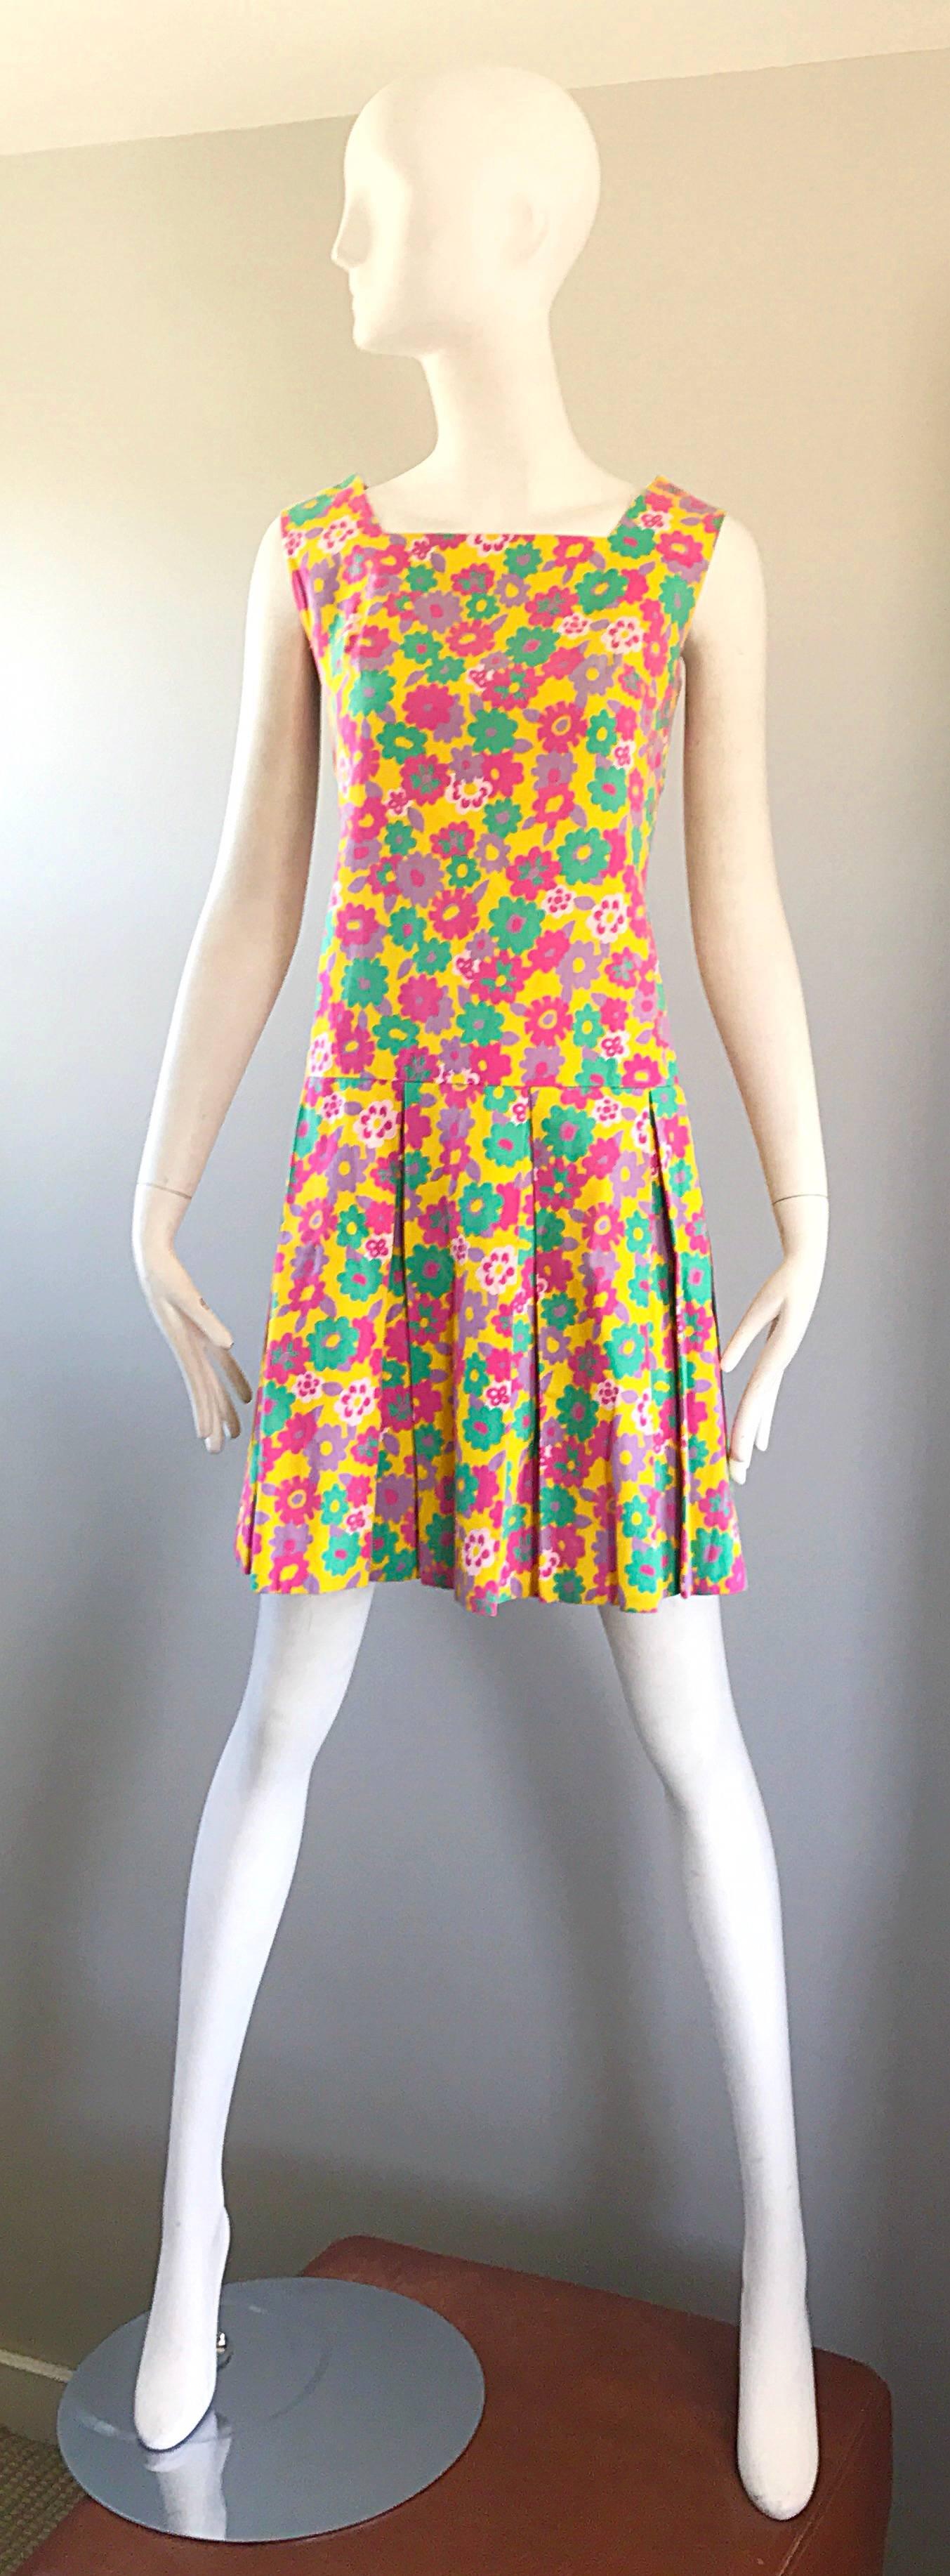 Super chic vintage yellow, green, pink, purple and white daisy flower print cotton skooter dres! Features a nice tailored bodice with a pleated flattering 
A-Line skirt. Hidden metal zipper up the back with hook-and-eye closure. Great with flats,